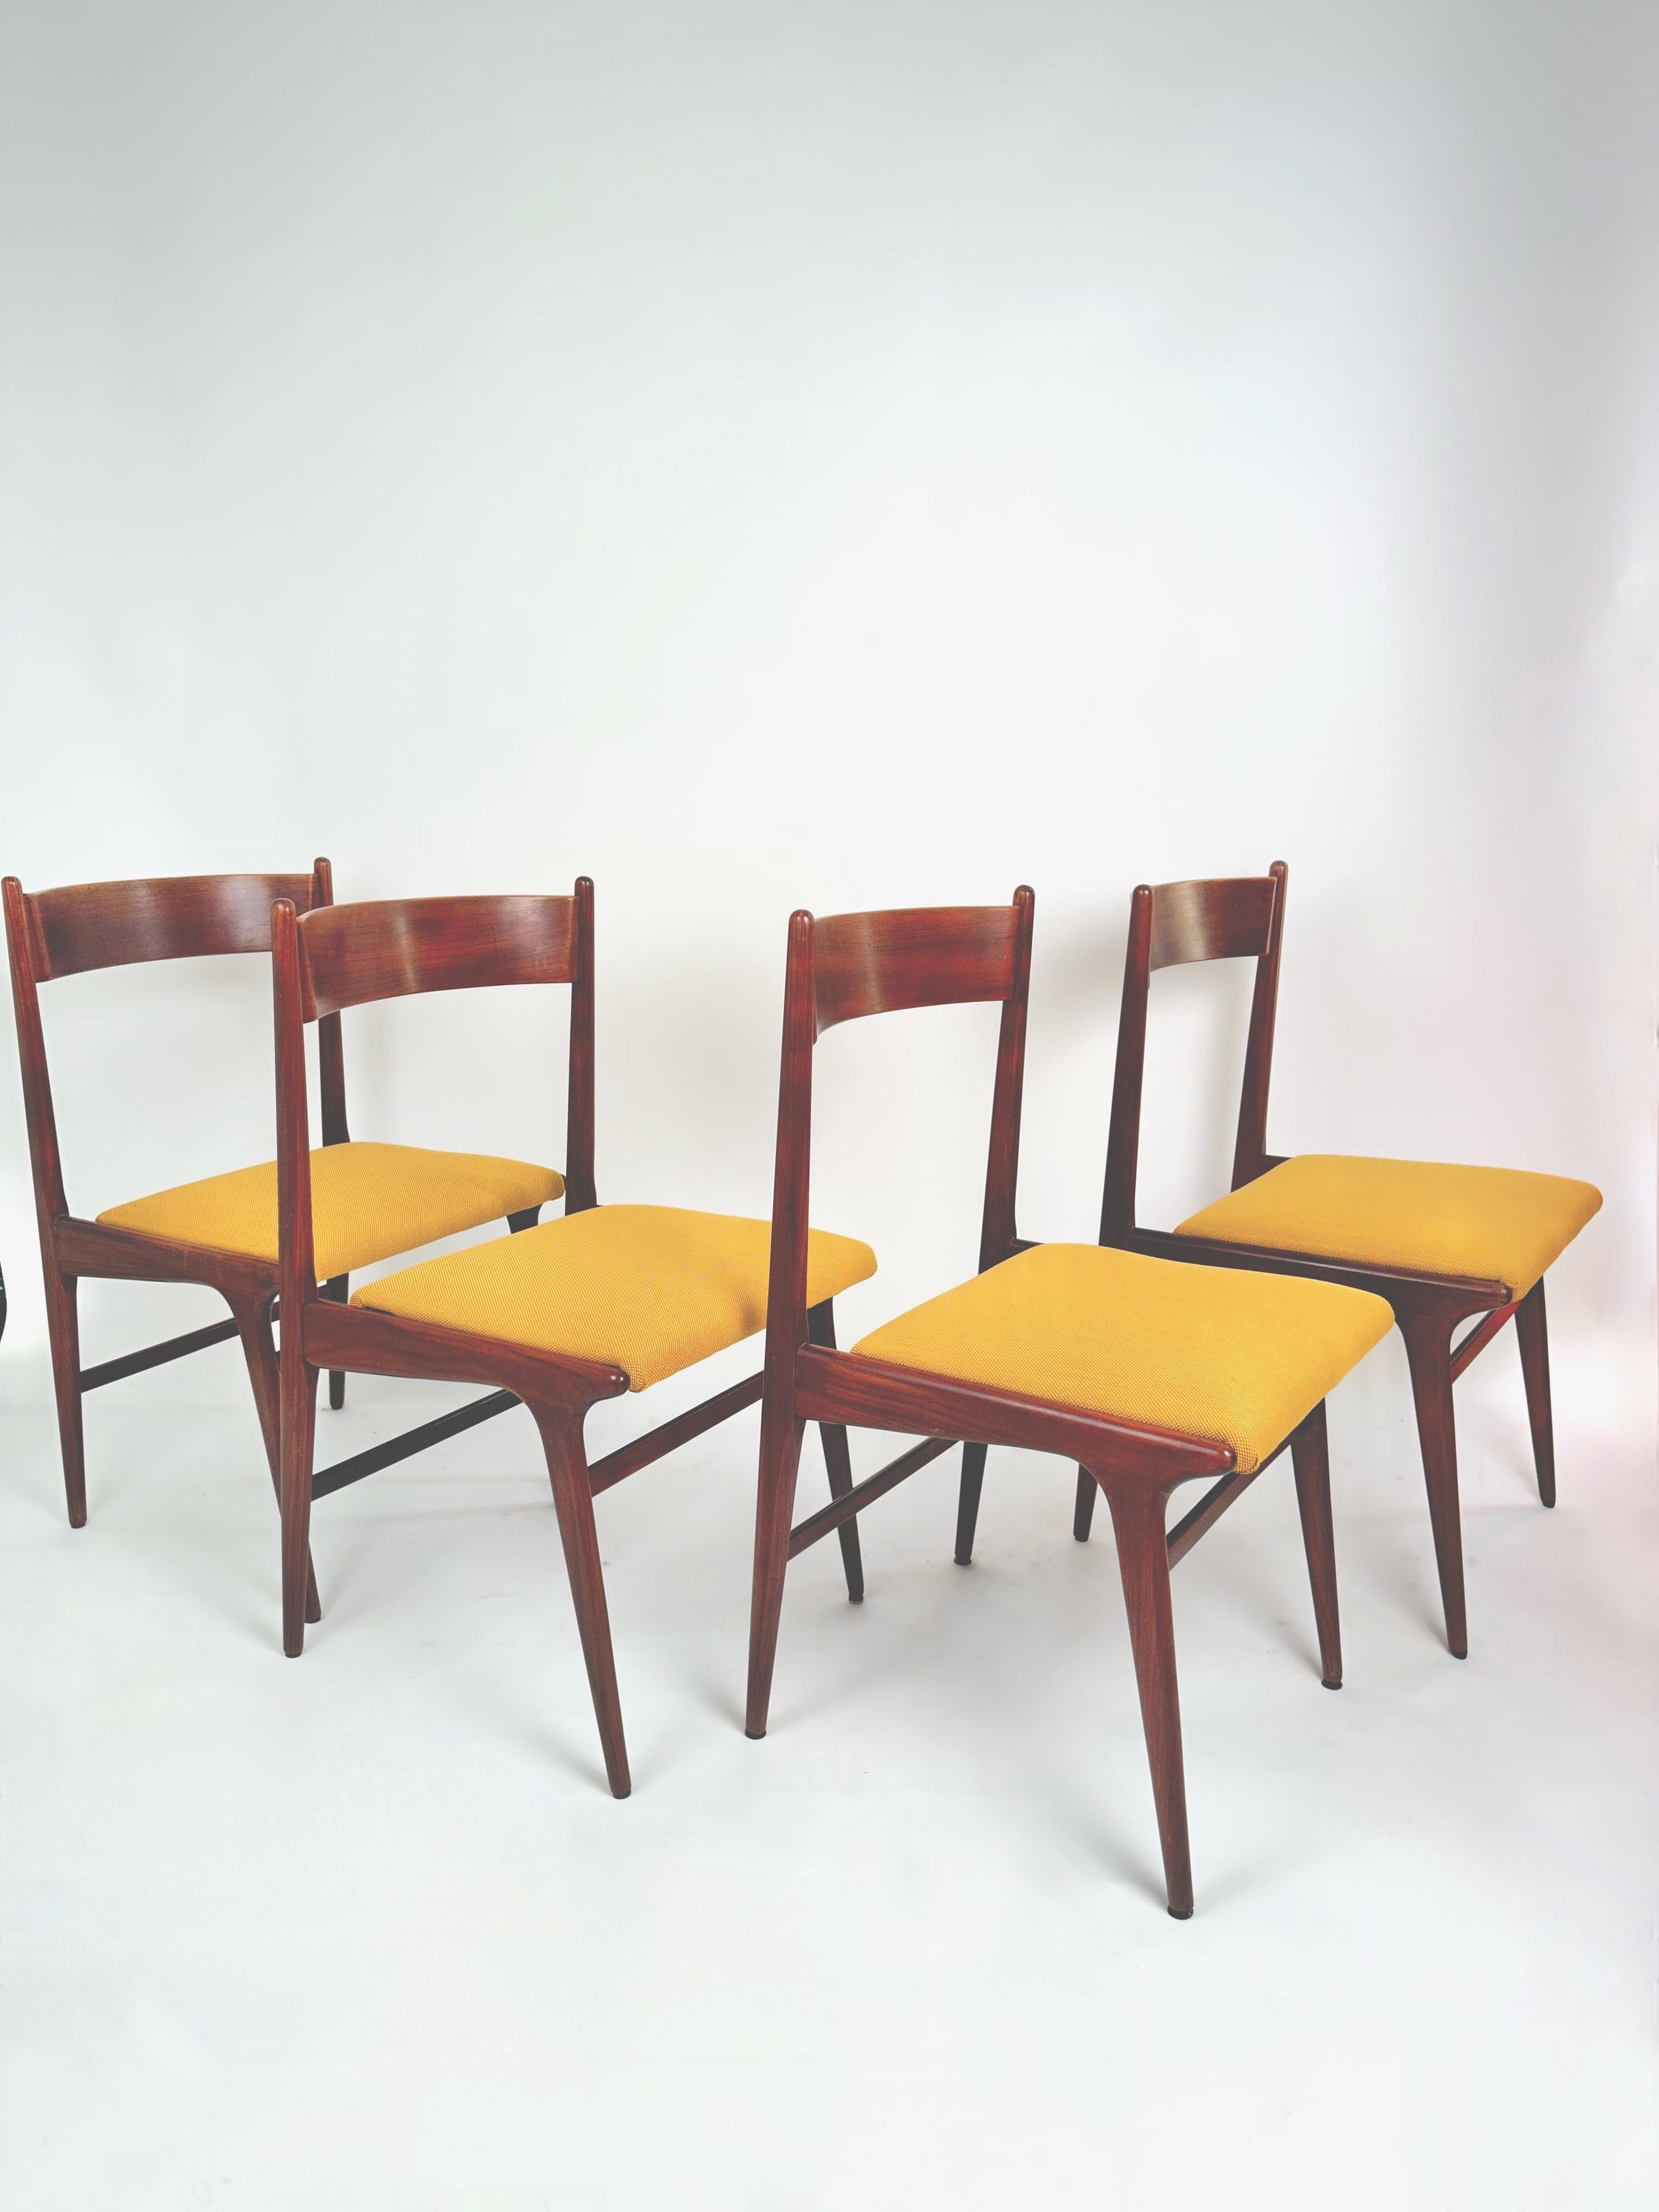 An elegant set of Carlo de Carli dining chairs. Teak frame and reupolstered in yellow Kvadrat fabric. Excellent condition.
Free professional packing.